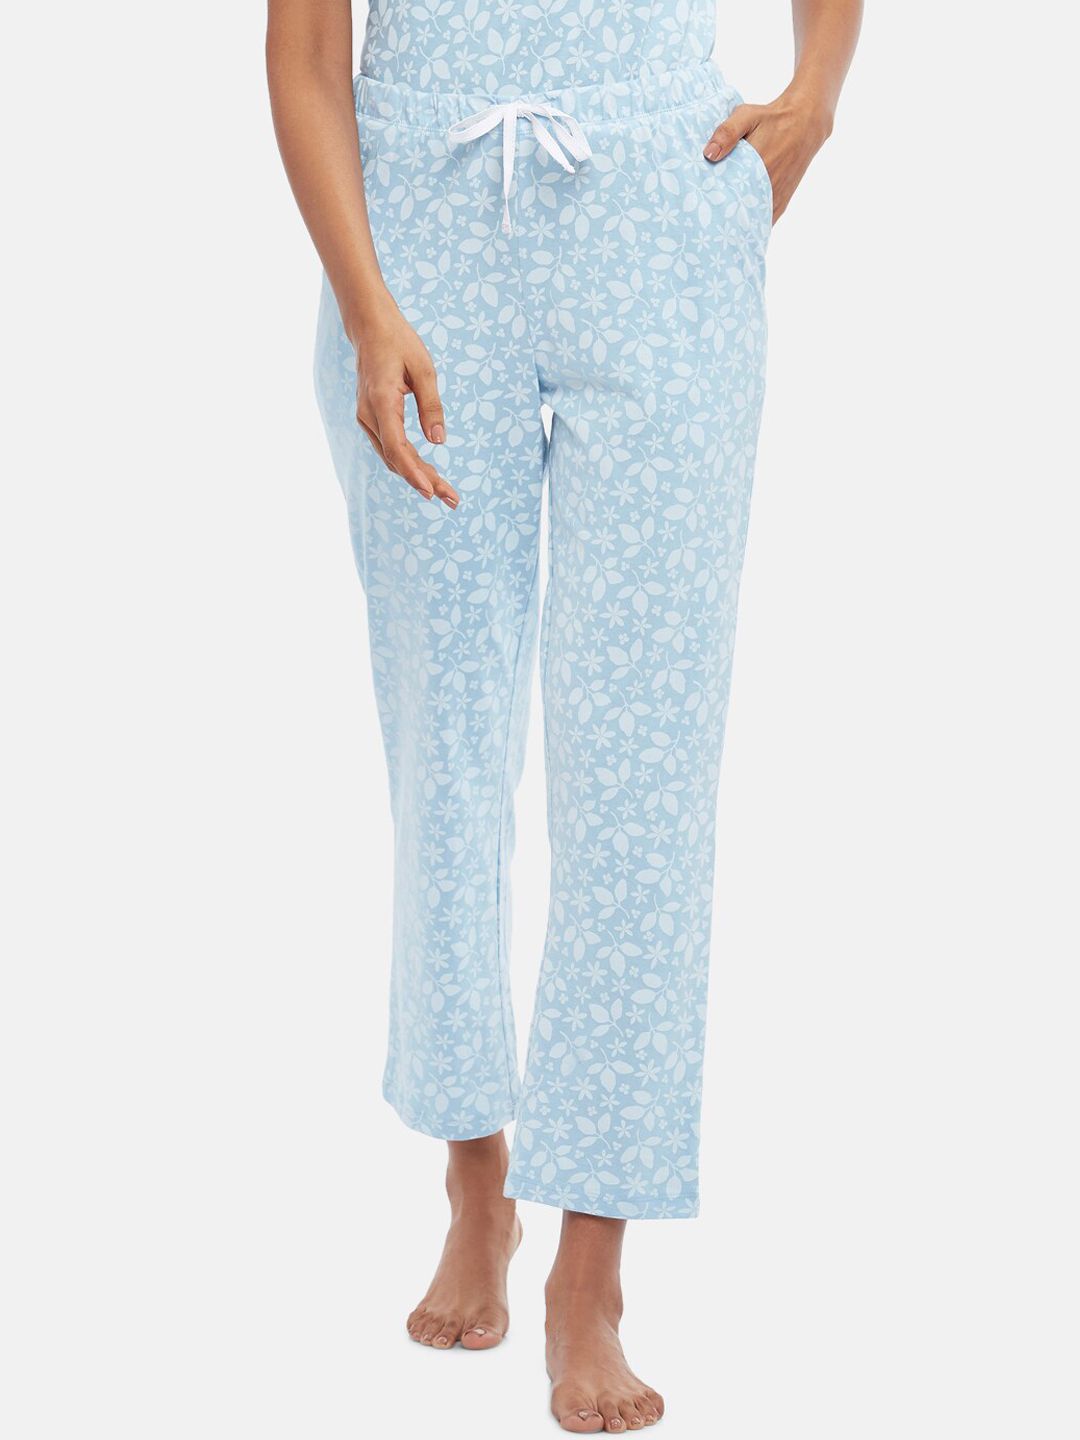 Dreamz by Pantaloons Woman Sky Blue Printed Lounge Pants Price in India